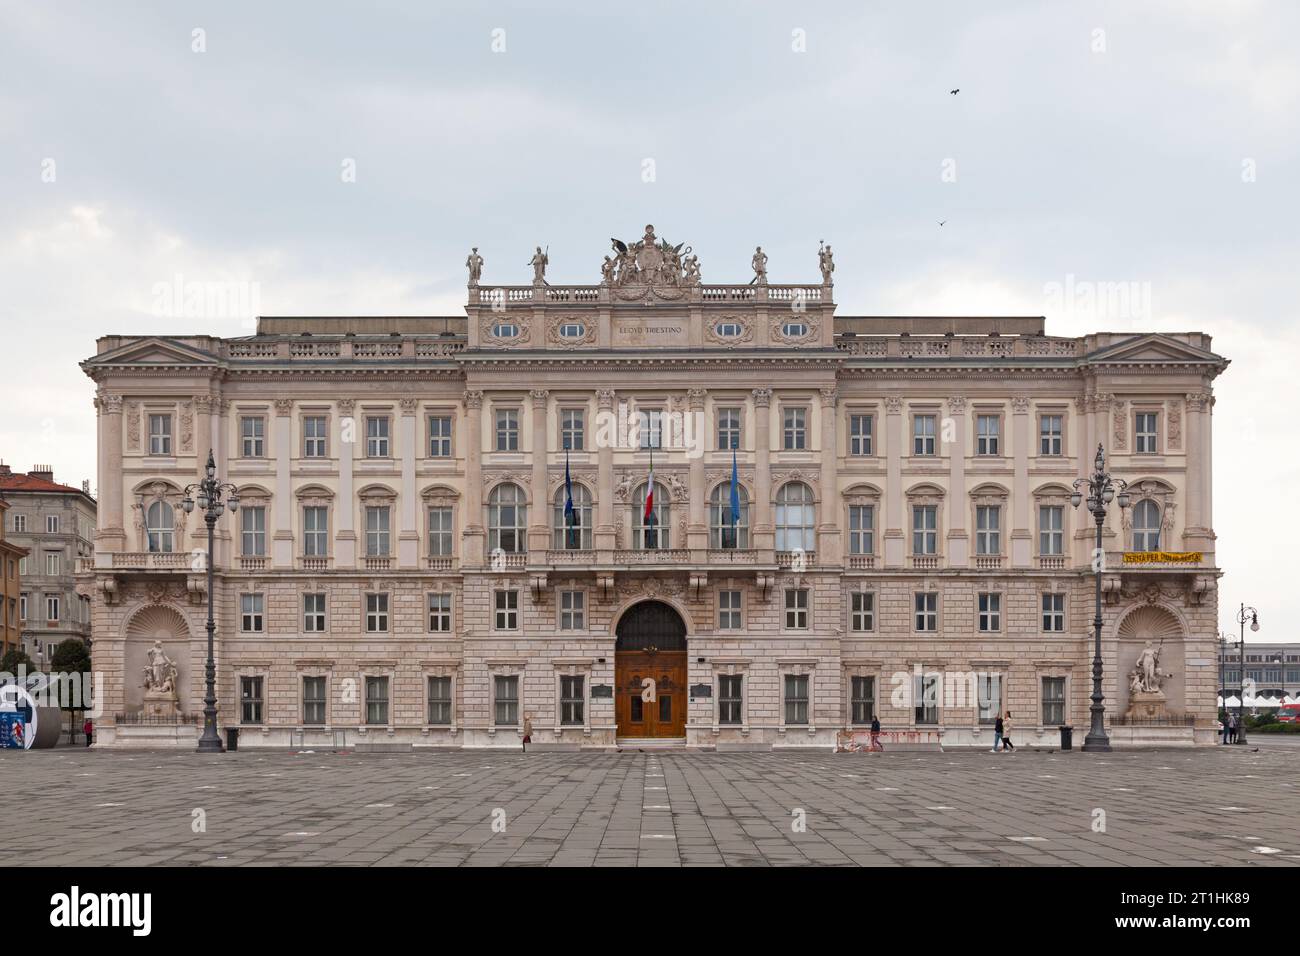 Trieste, Italy - April 08 2019: The Palazzo del Lloyd Triestino was founded as Österreichischer Lloyd (or 'Austrian Lloyd') in 1836 and became one of Stock Photo